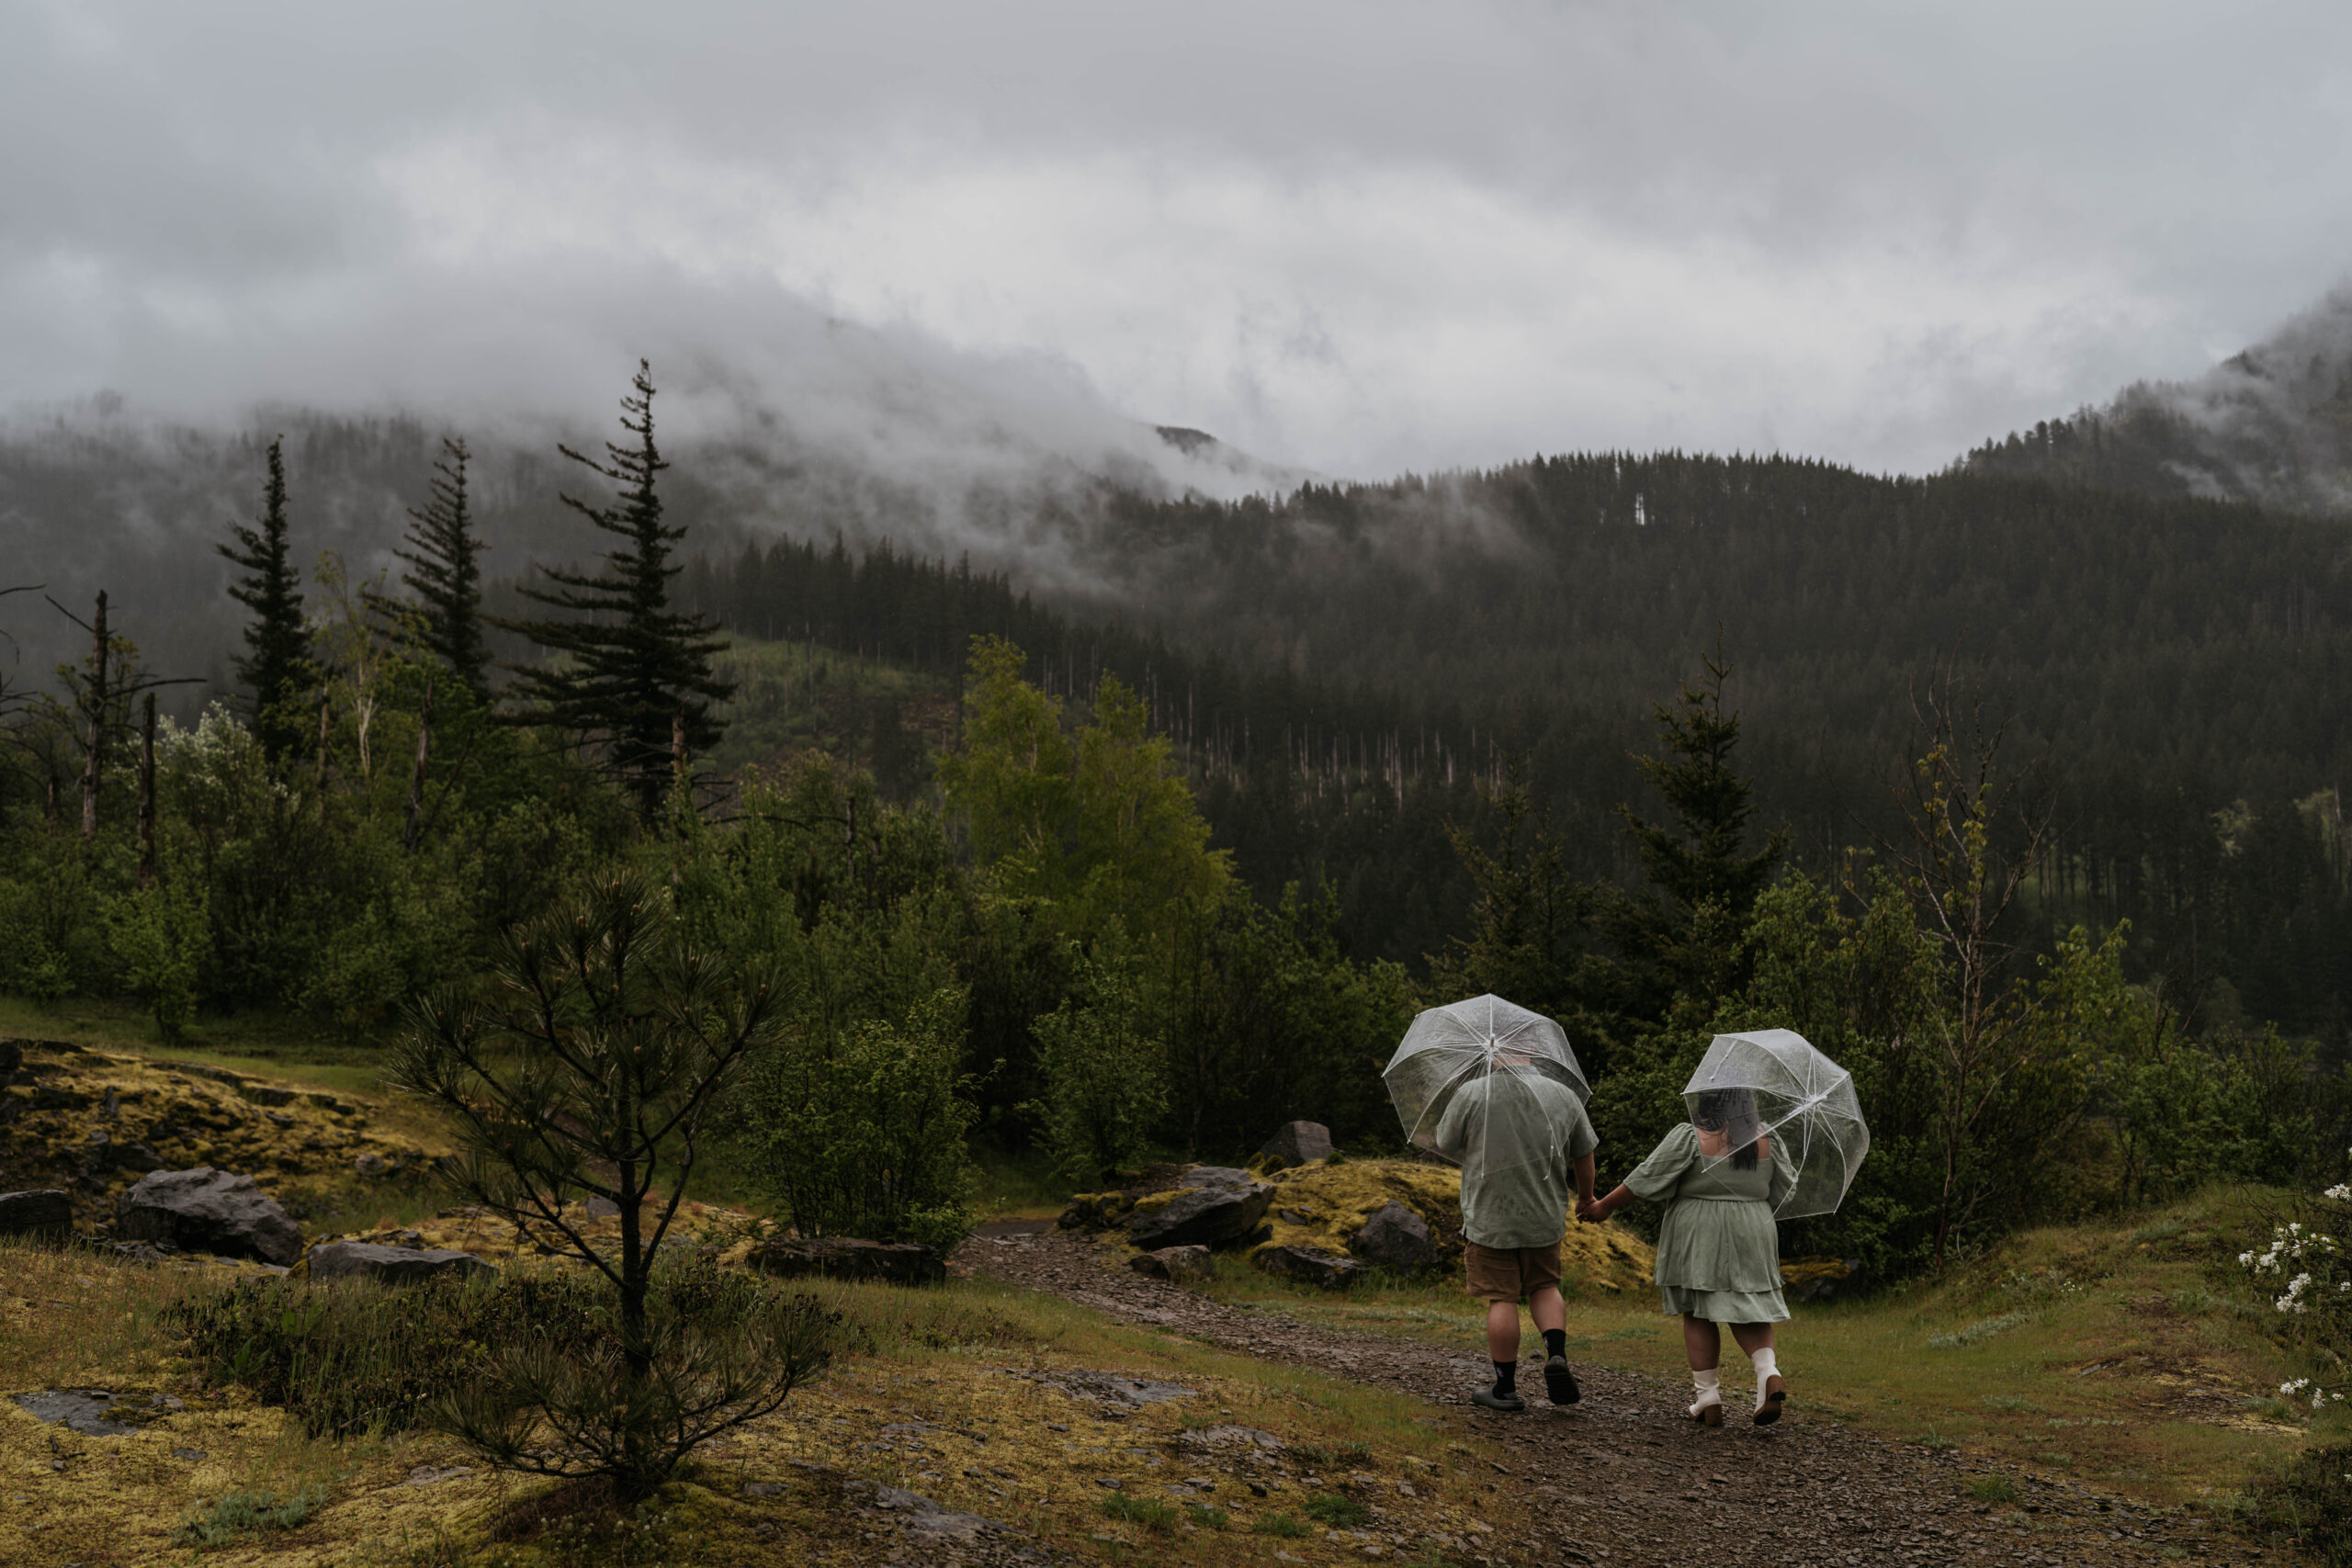 couple walking on path with umbrellas in the rain in mountain landscape